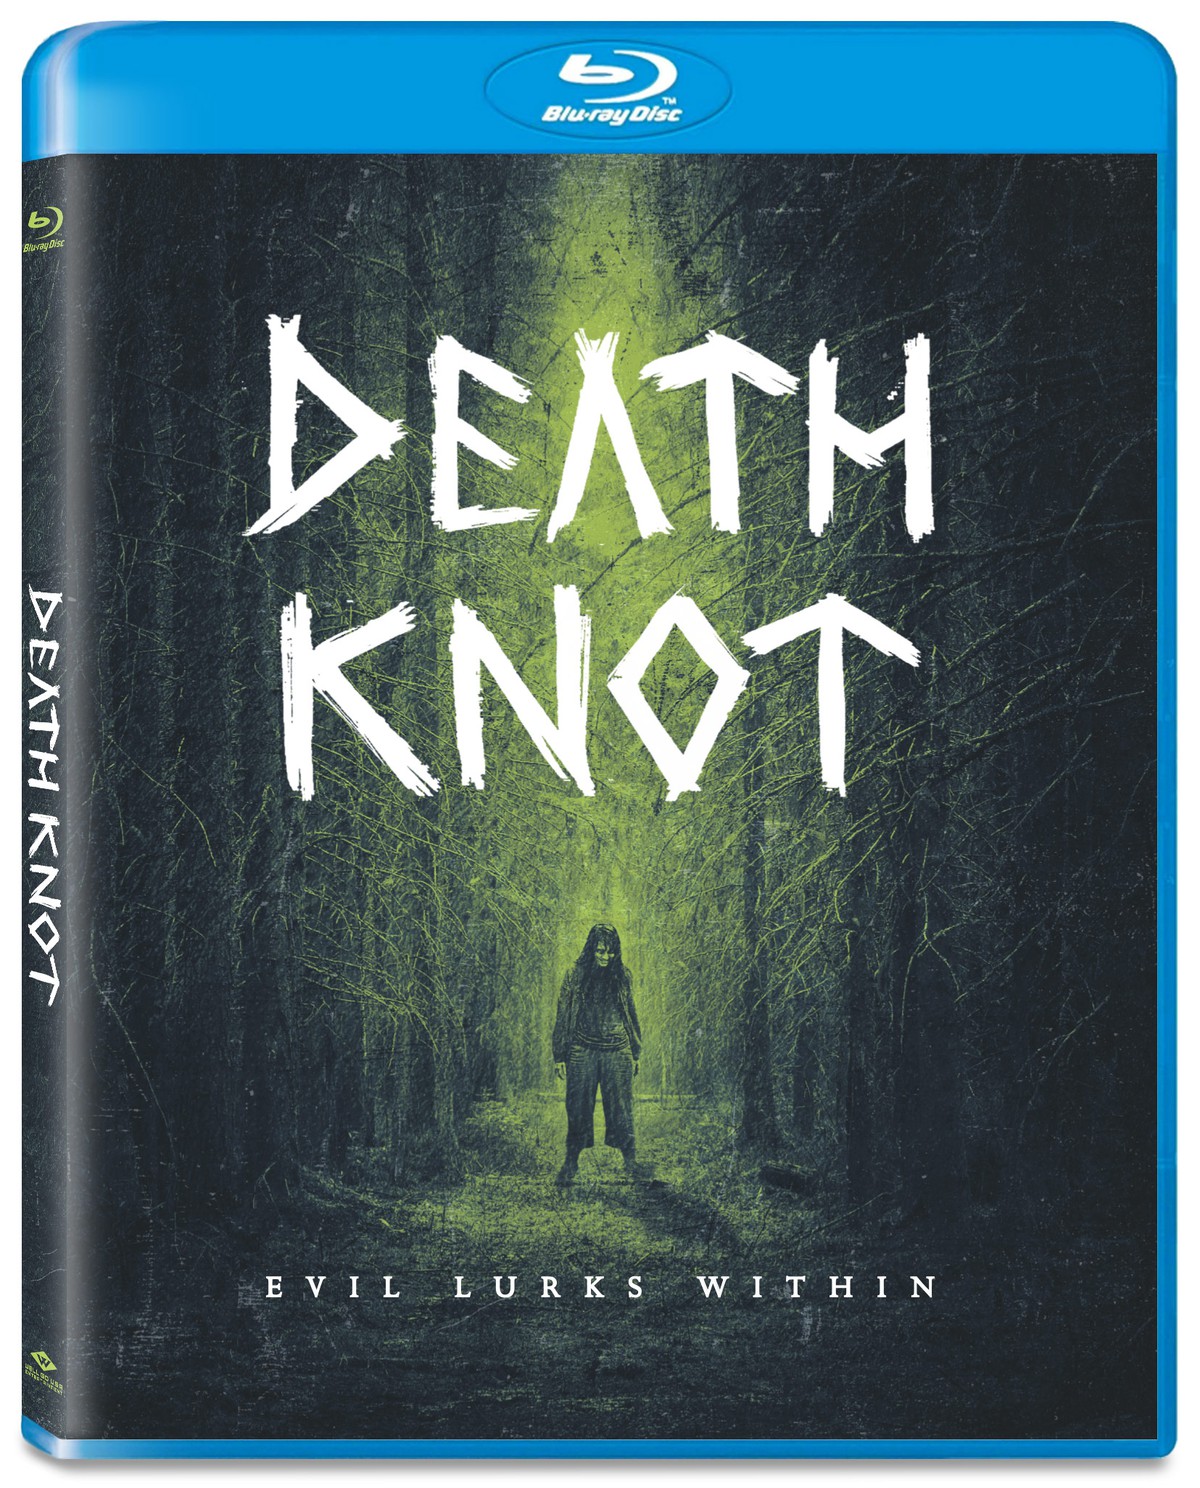 WIN a Blu-ray of the Indonesian horror film DEATH KNOT!!